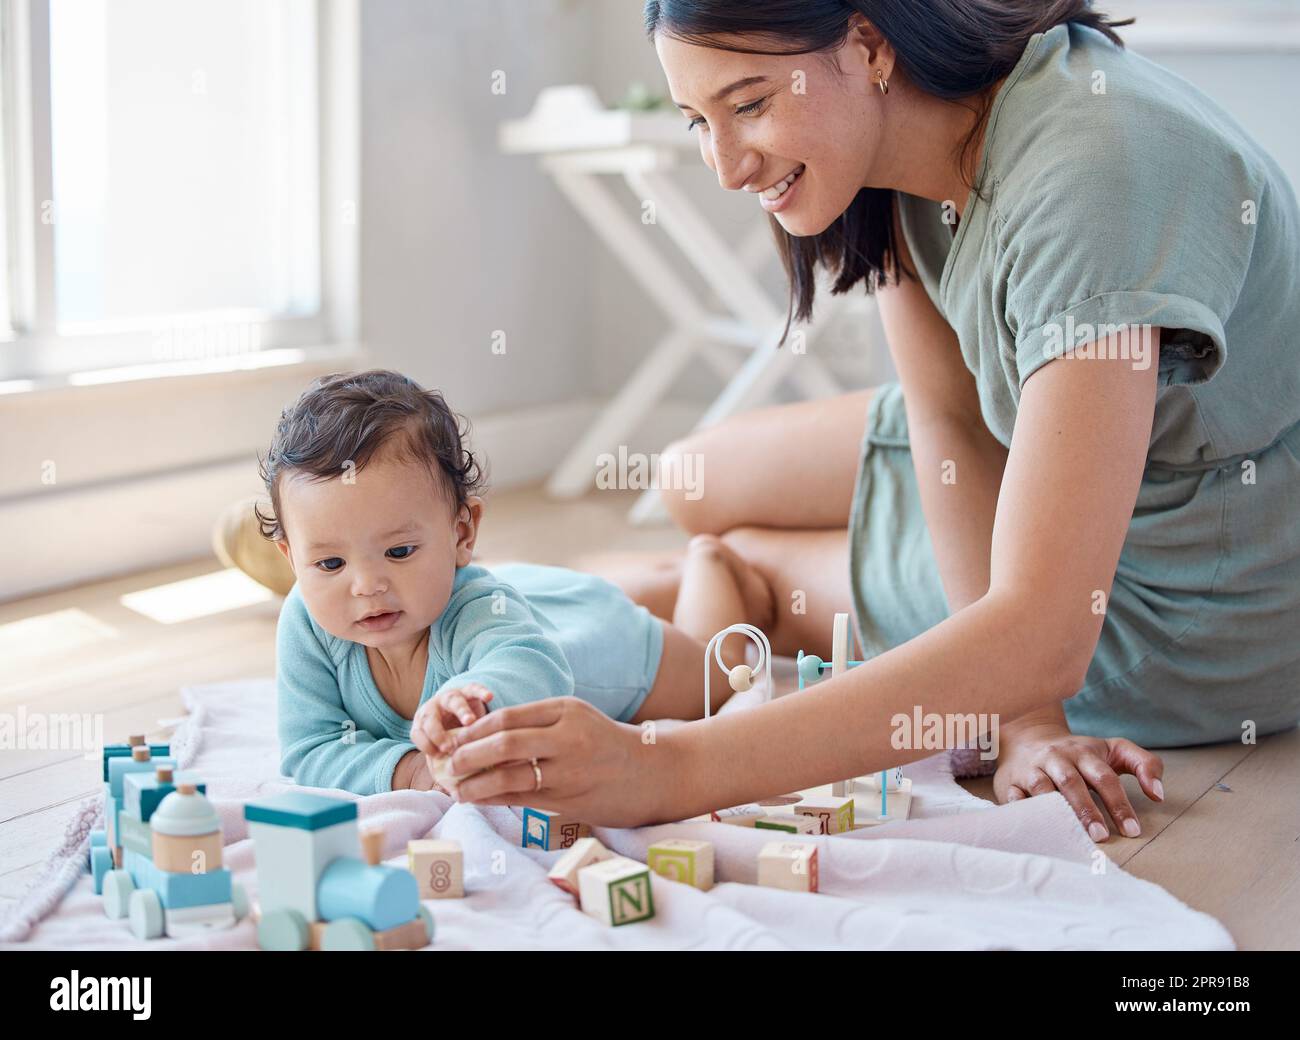 We make tummy time fun. a woman playing with her baby at home. Stock Photo